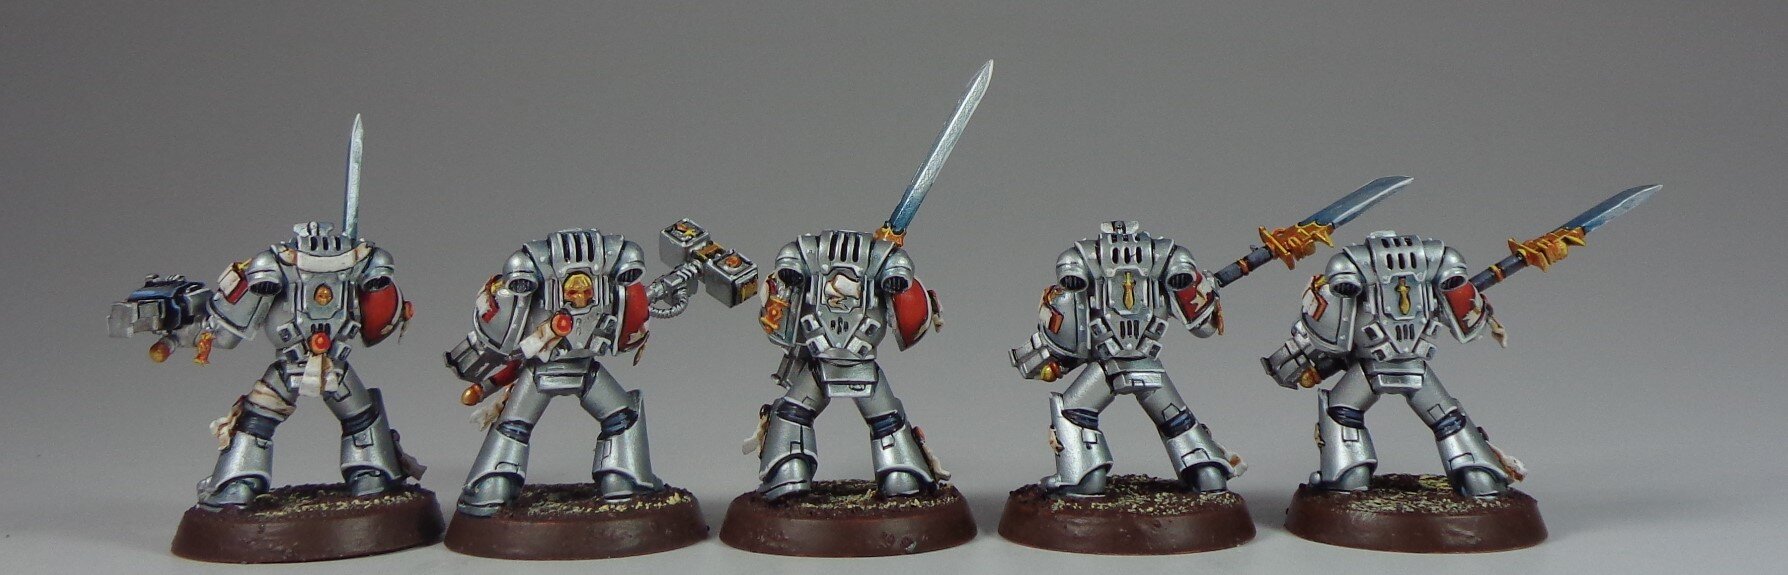 Some 40k Grey Knights, the Best We can Paint Them — Paintedfigs Miniature  Painting Service